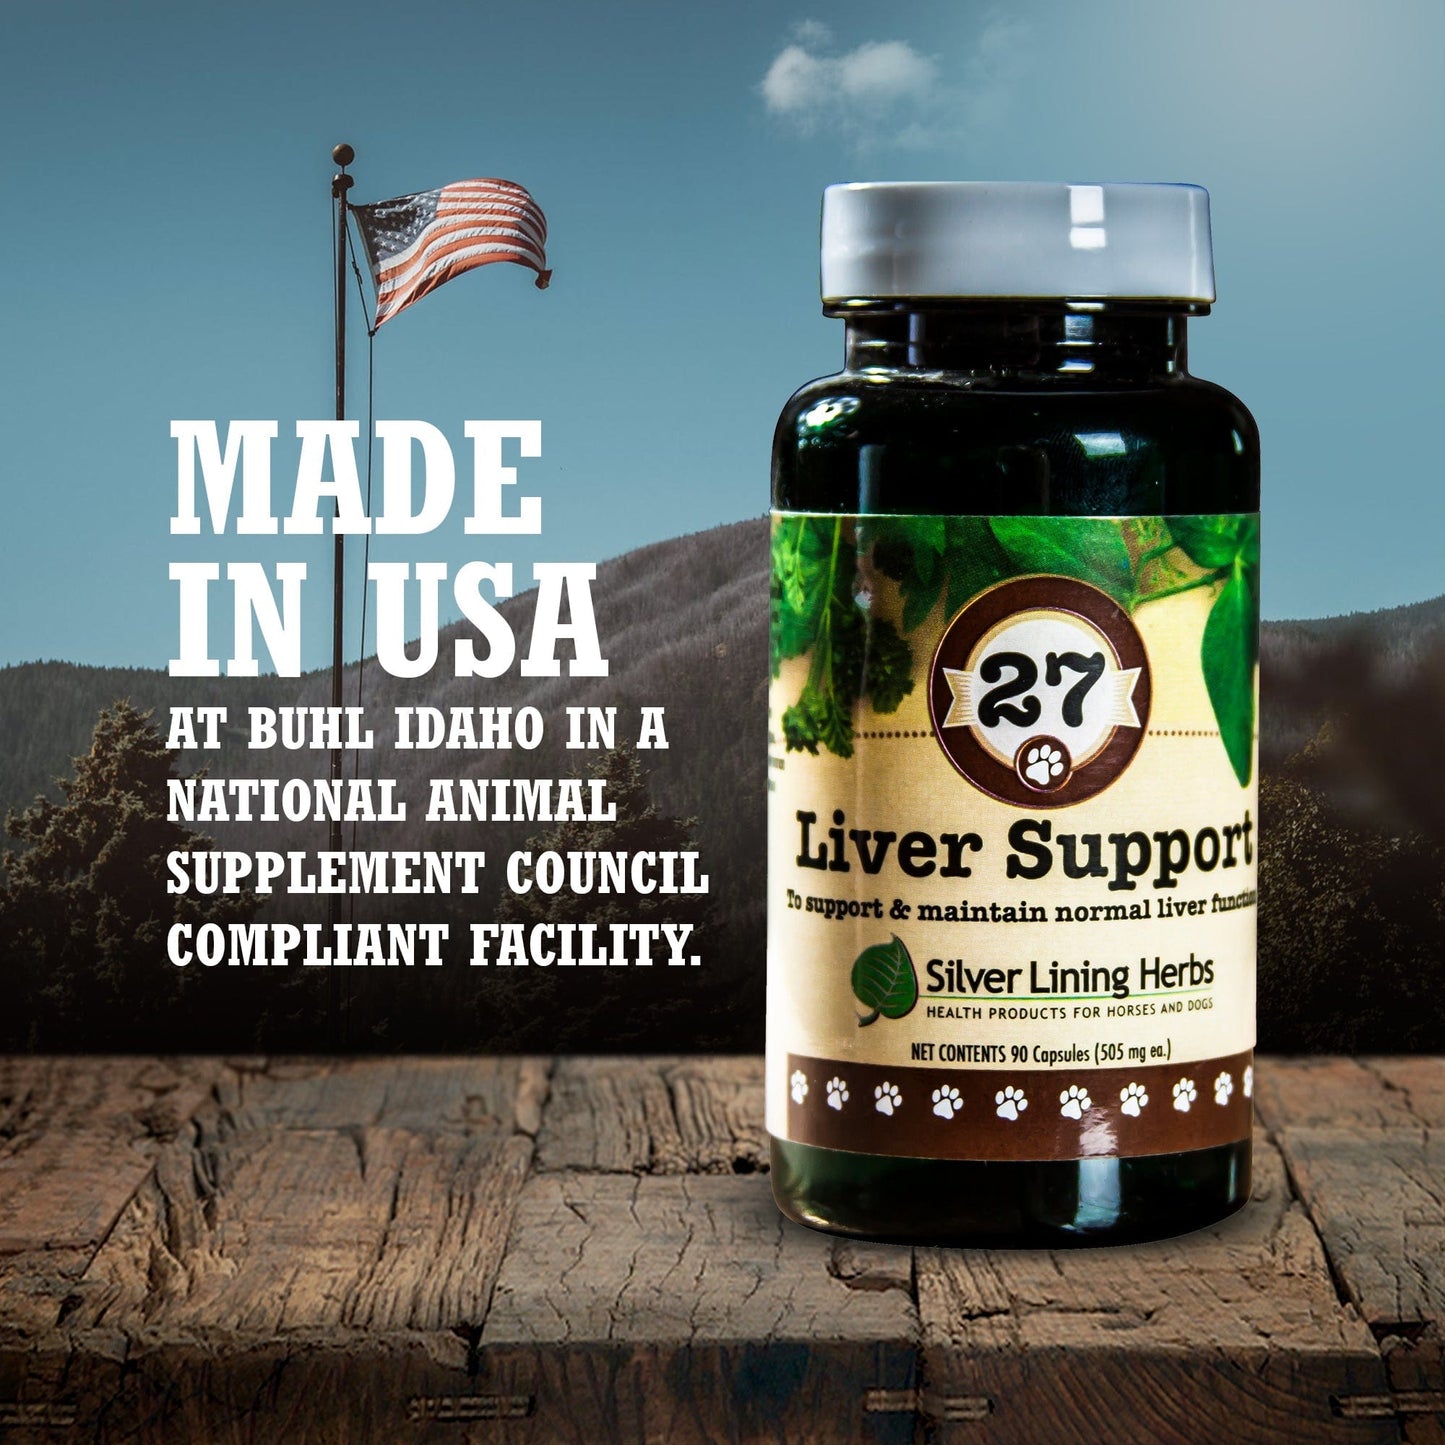 A bottle of #27 Liver Support for Dogs with text explaining where the product was produced in the USA